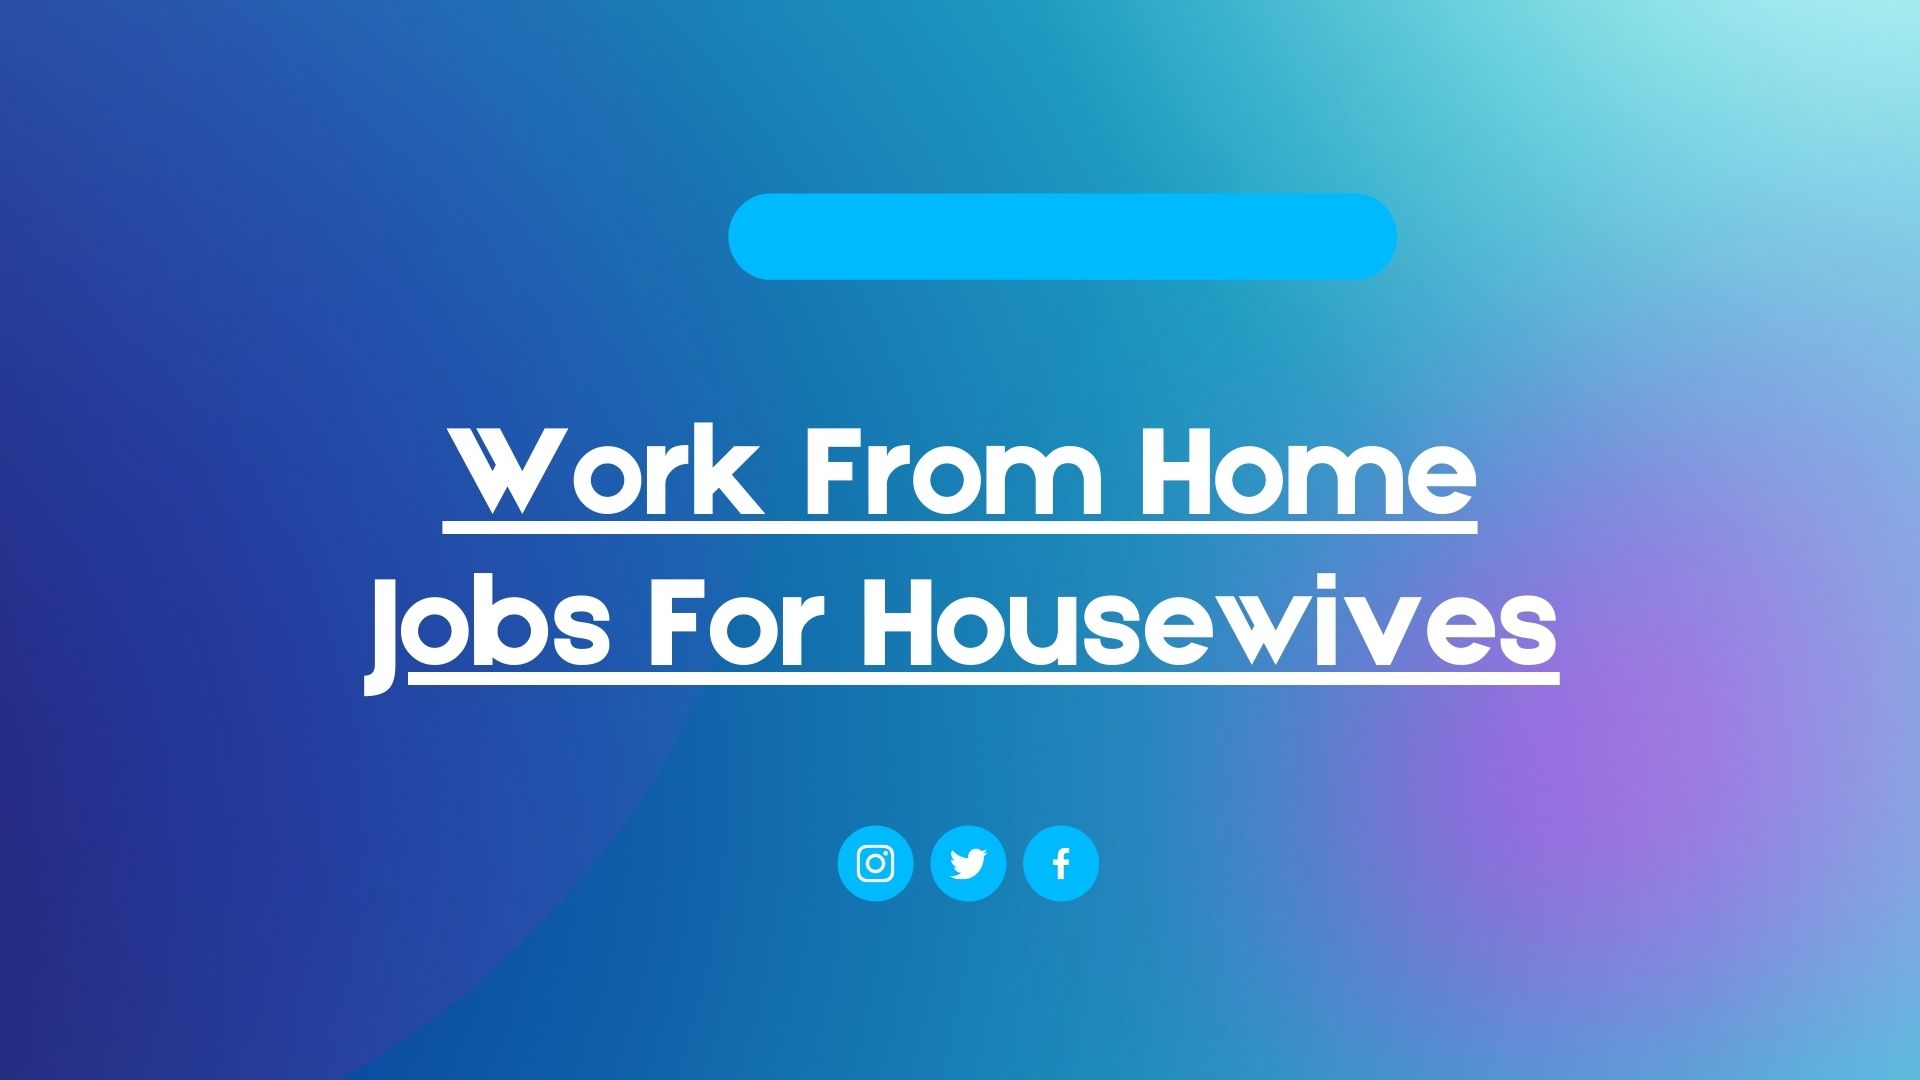 Work From Home Jobs For Housewives